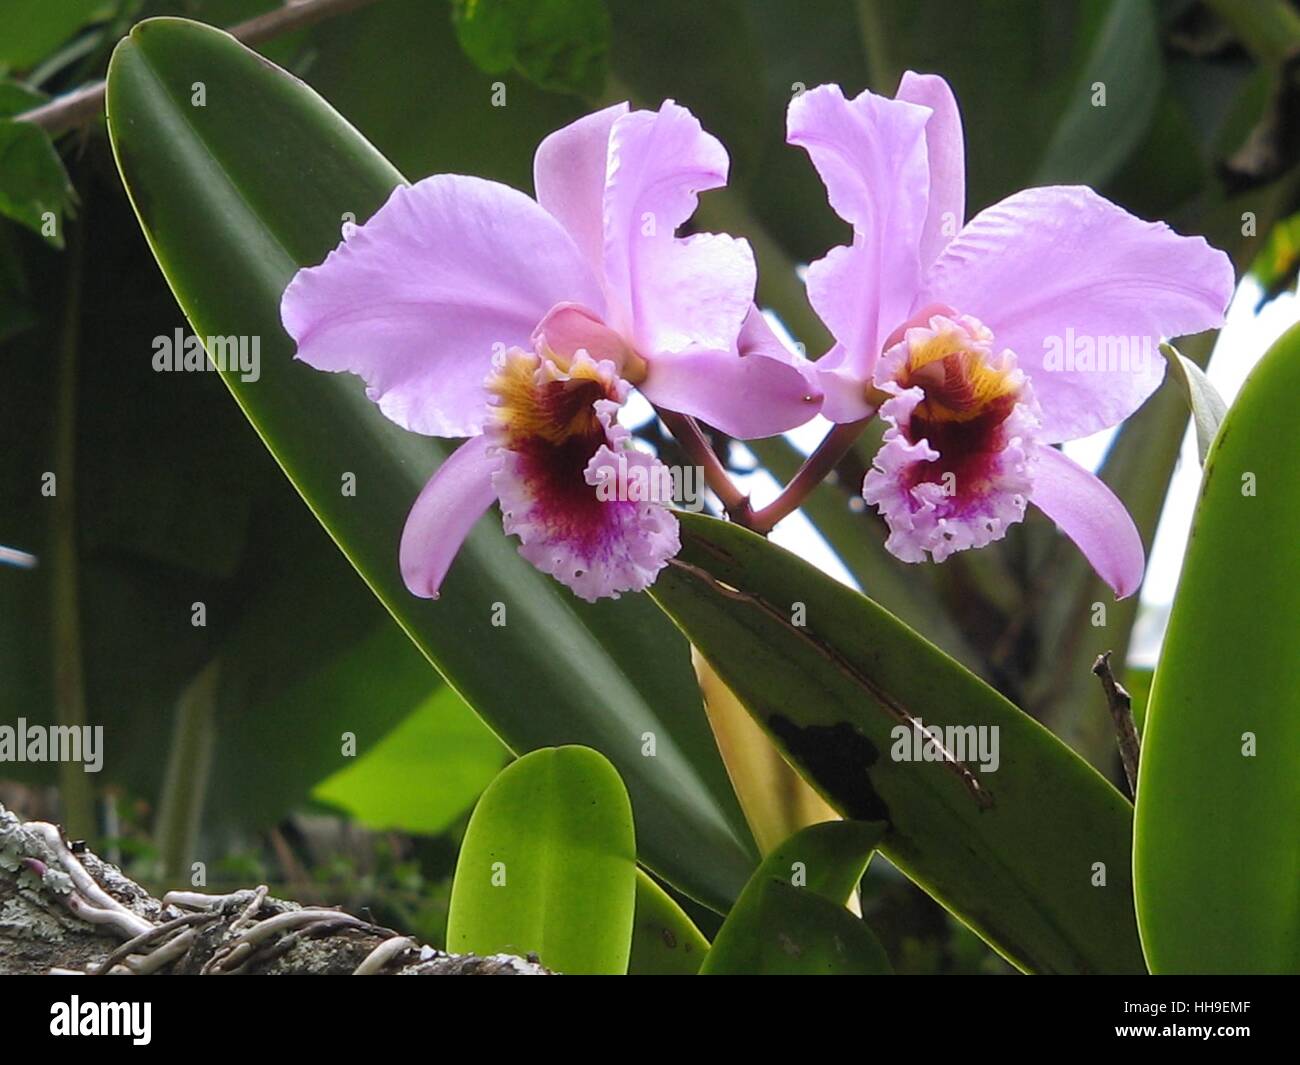 Cattleya mossiae. This species is the national flower of Venezuela since 1951. Stock Photo